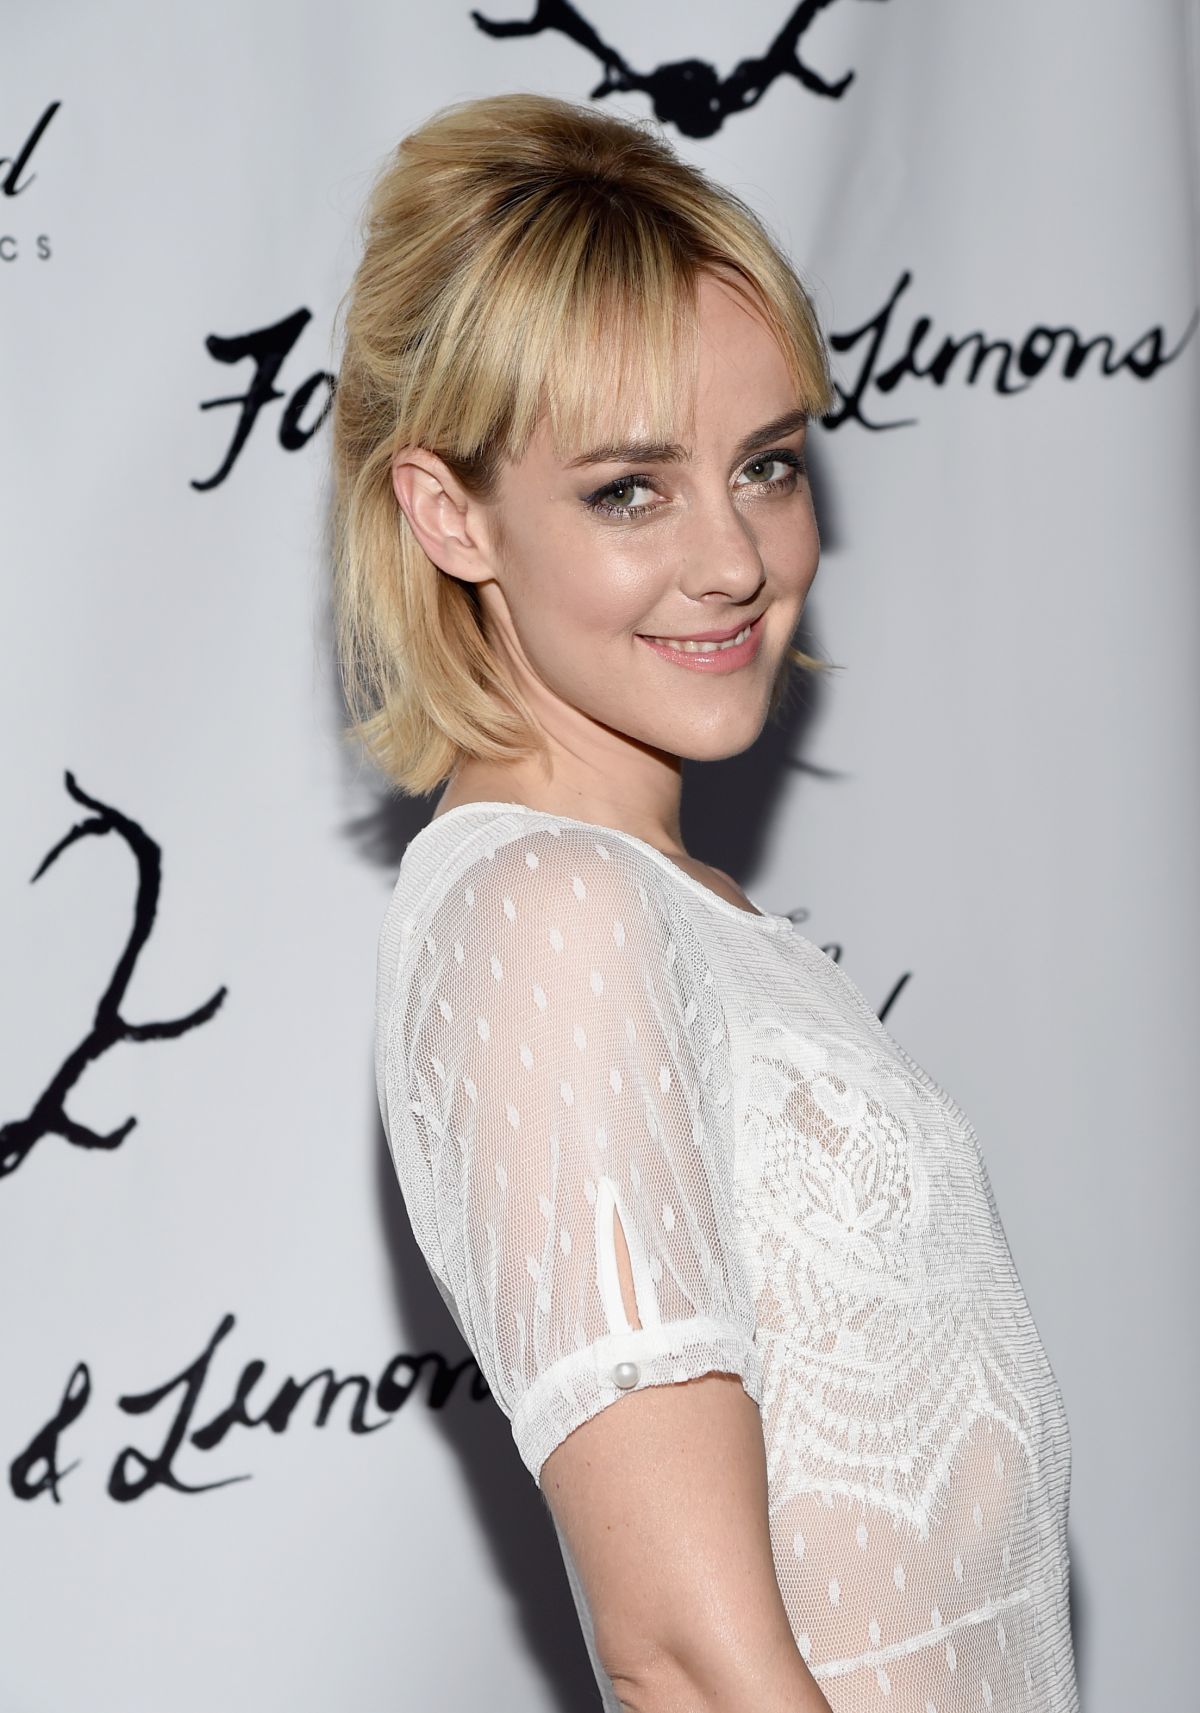 JENA MALONE at For Love and Lemons Skivvies Party in Los Angeles – HawtCelebs1200 x 1713